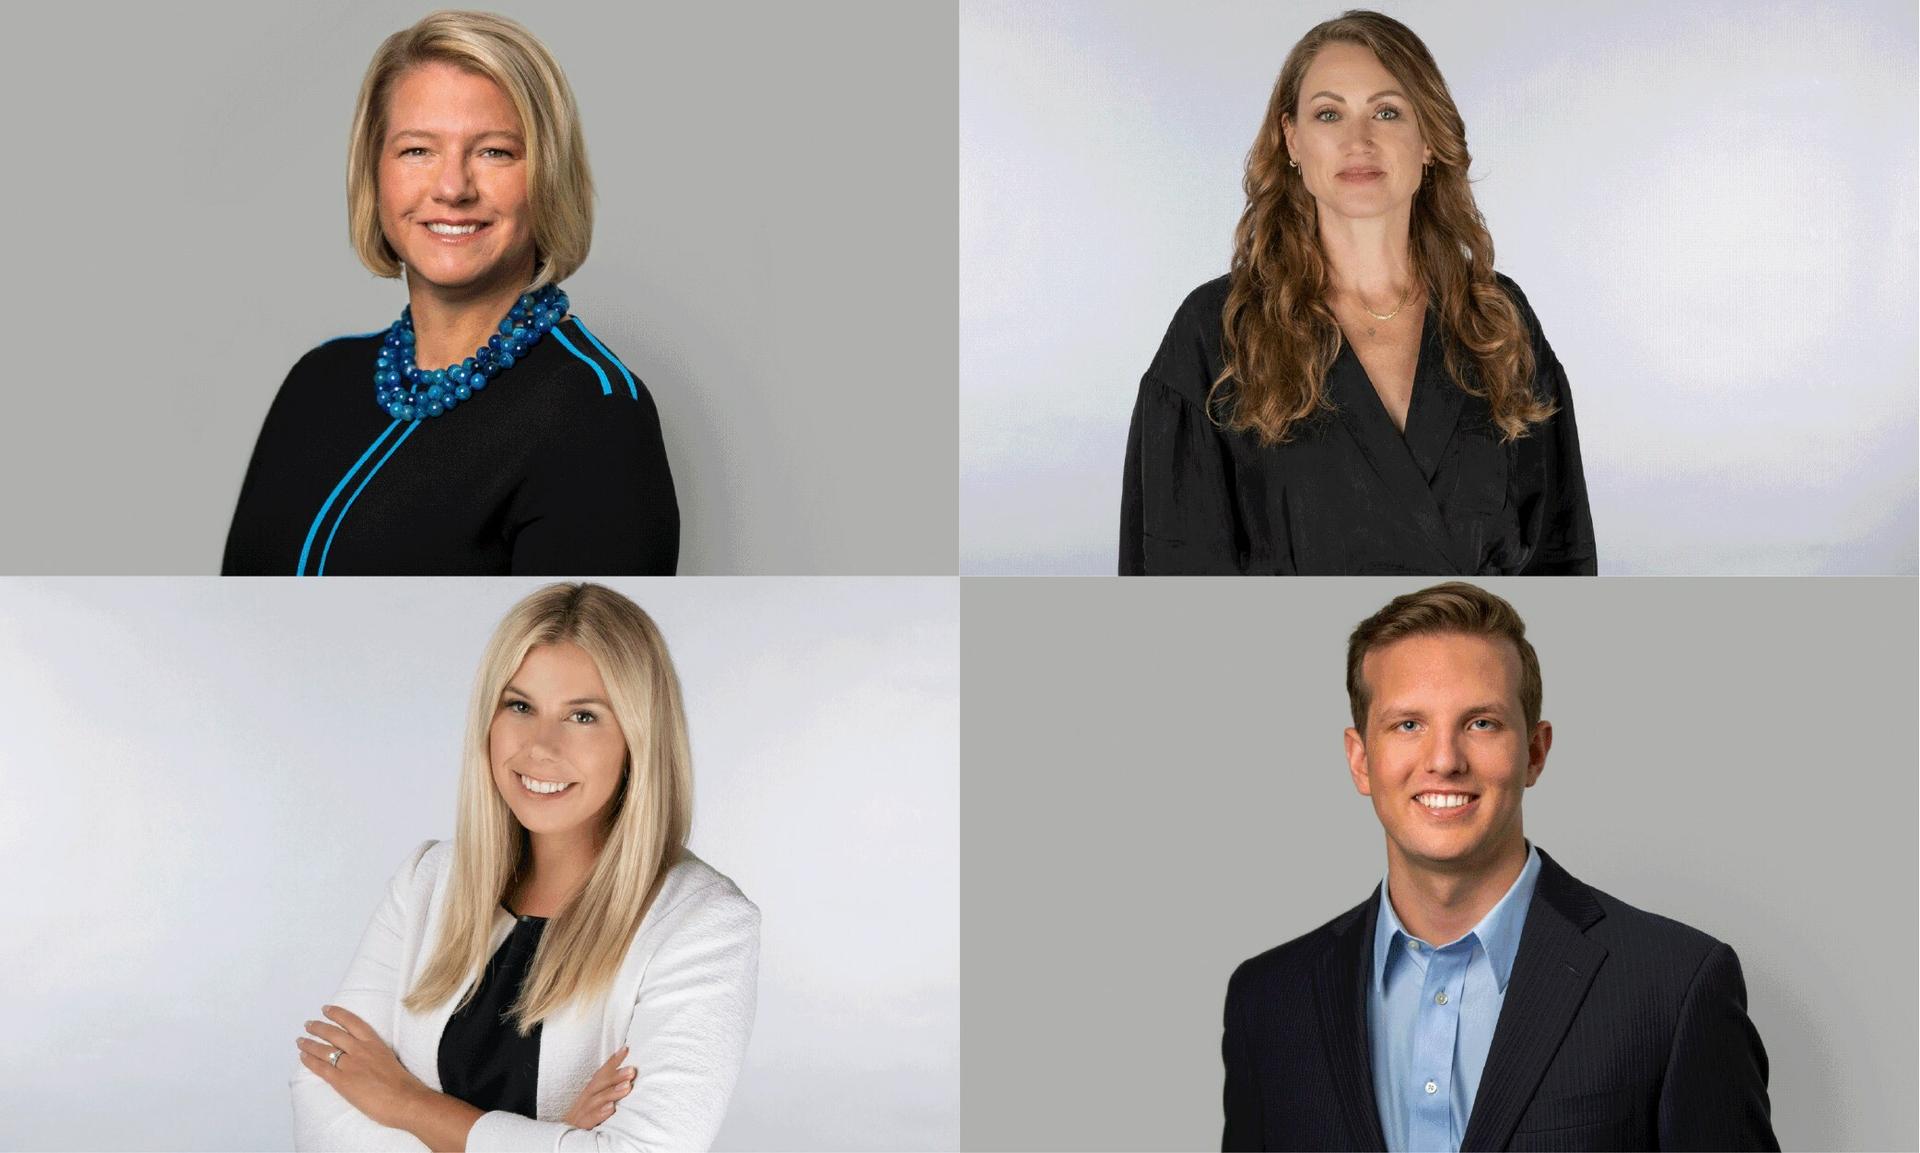 Top Boulder, CO-based corporate team joins leading distributed firm Scale LLP, following national consolidation trend